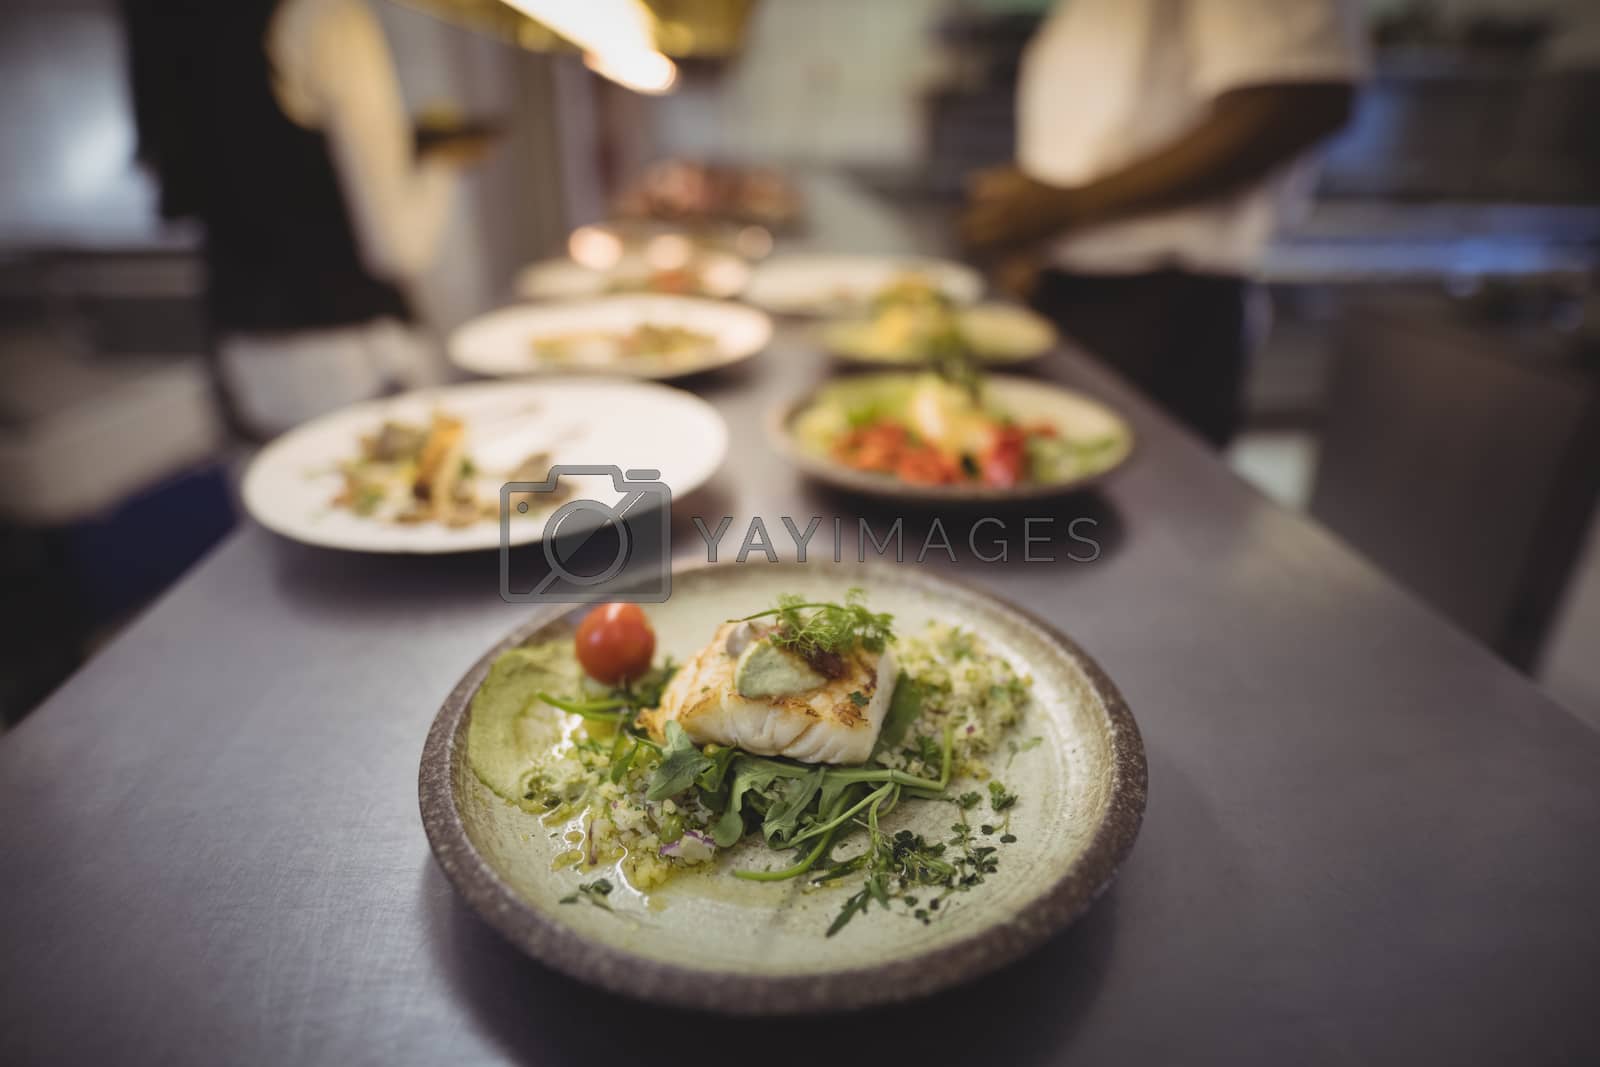 Royalty free image of Close-up of garnished food served in plate by Wavebreakmedia